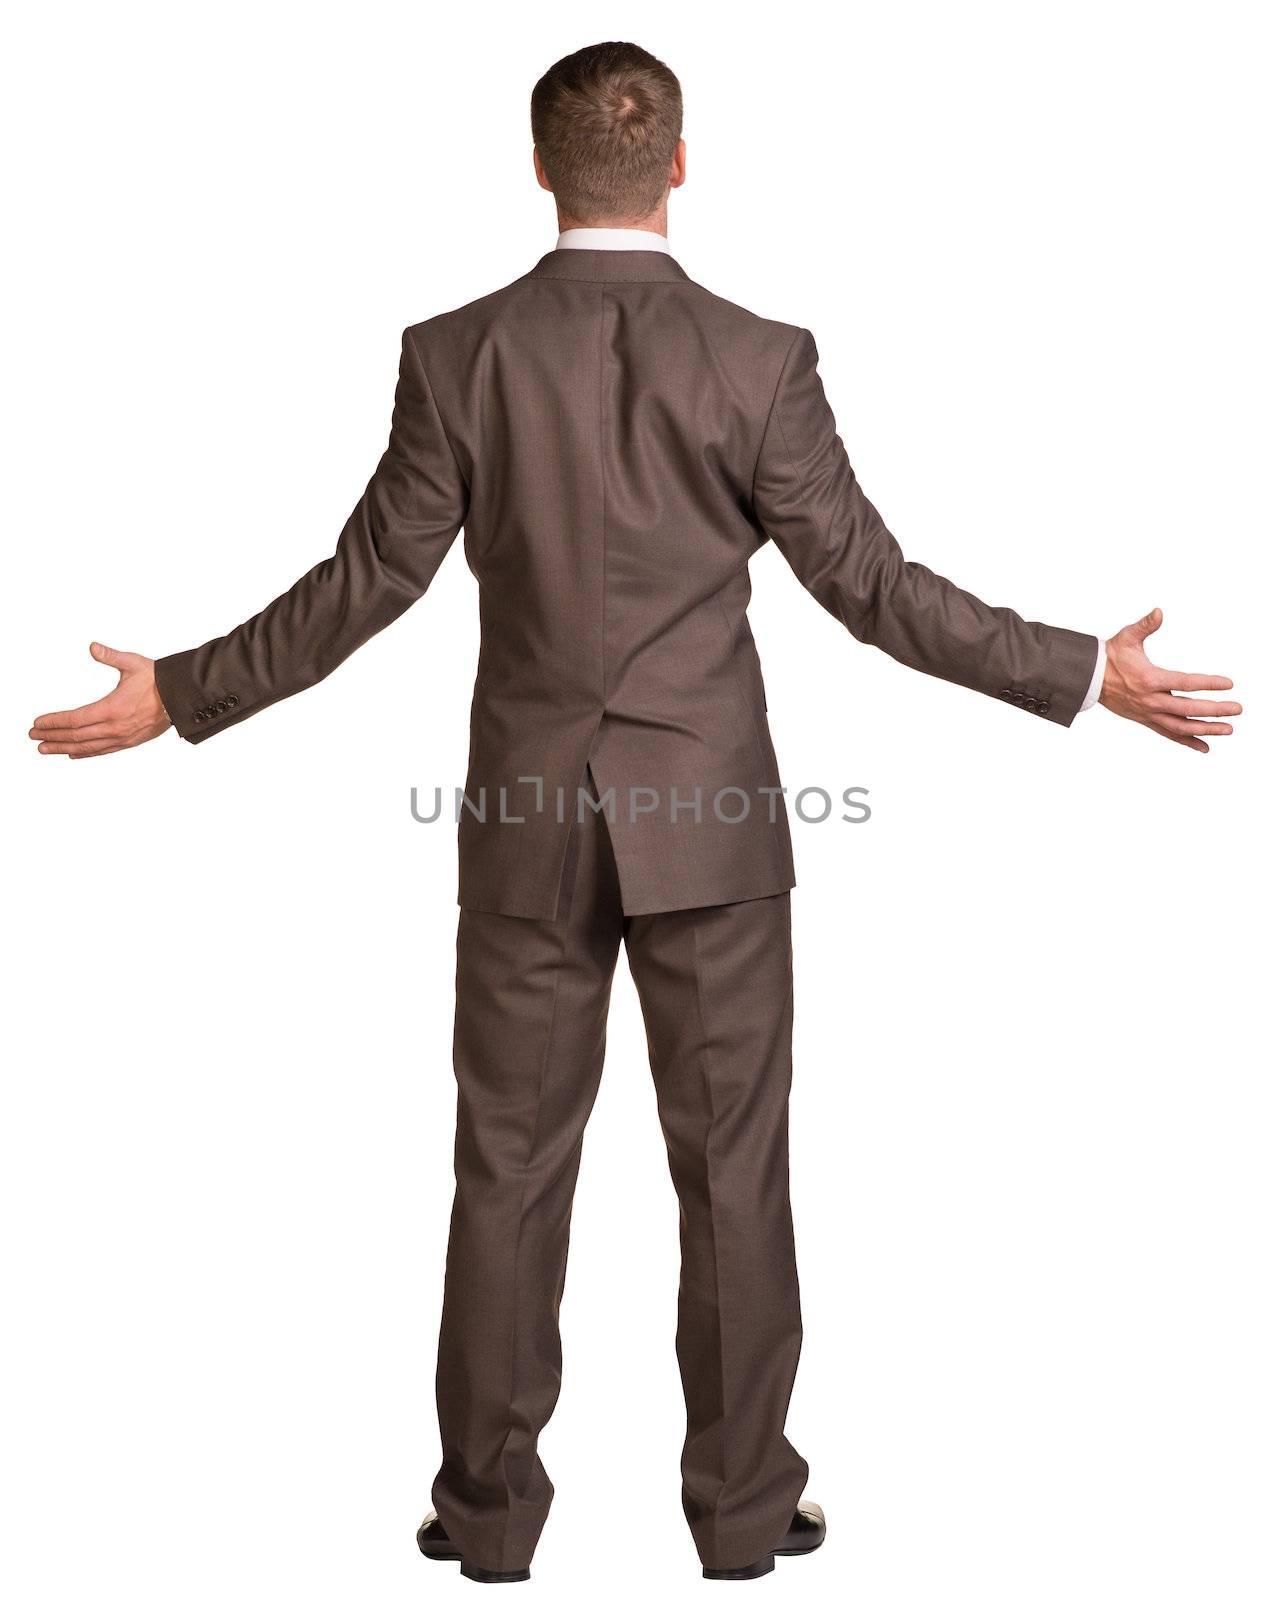 Businessman holding hands up to sides. Rear view. Isolated on white background.